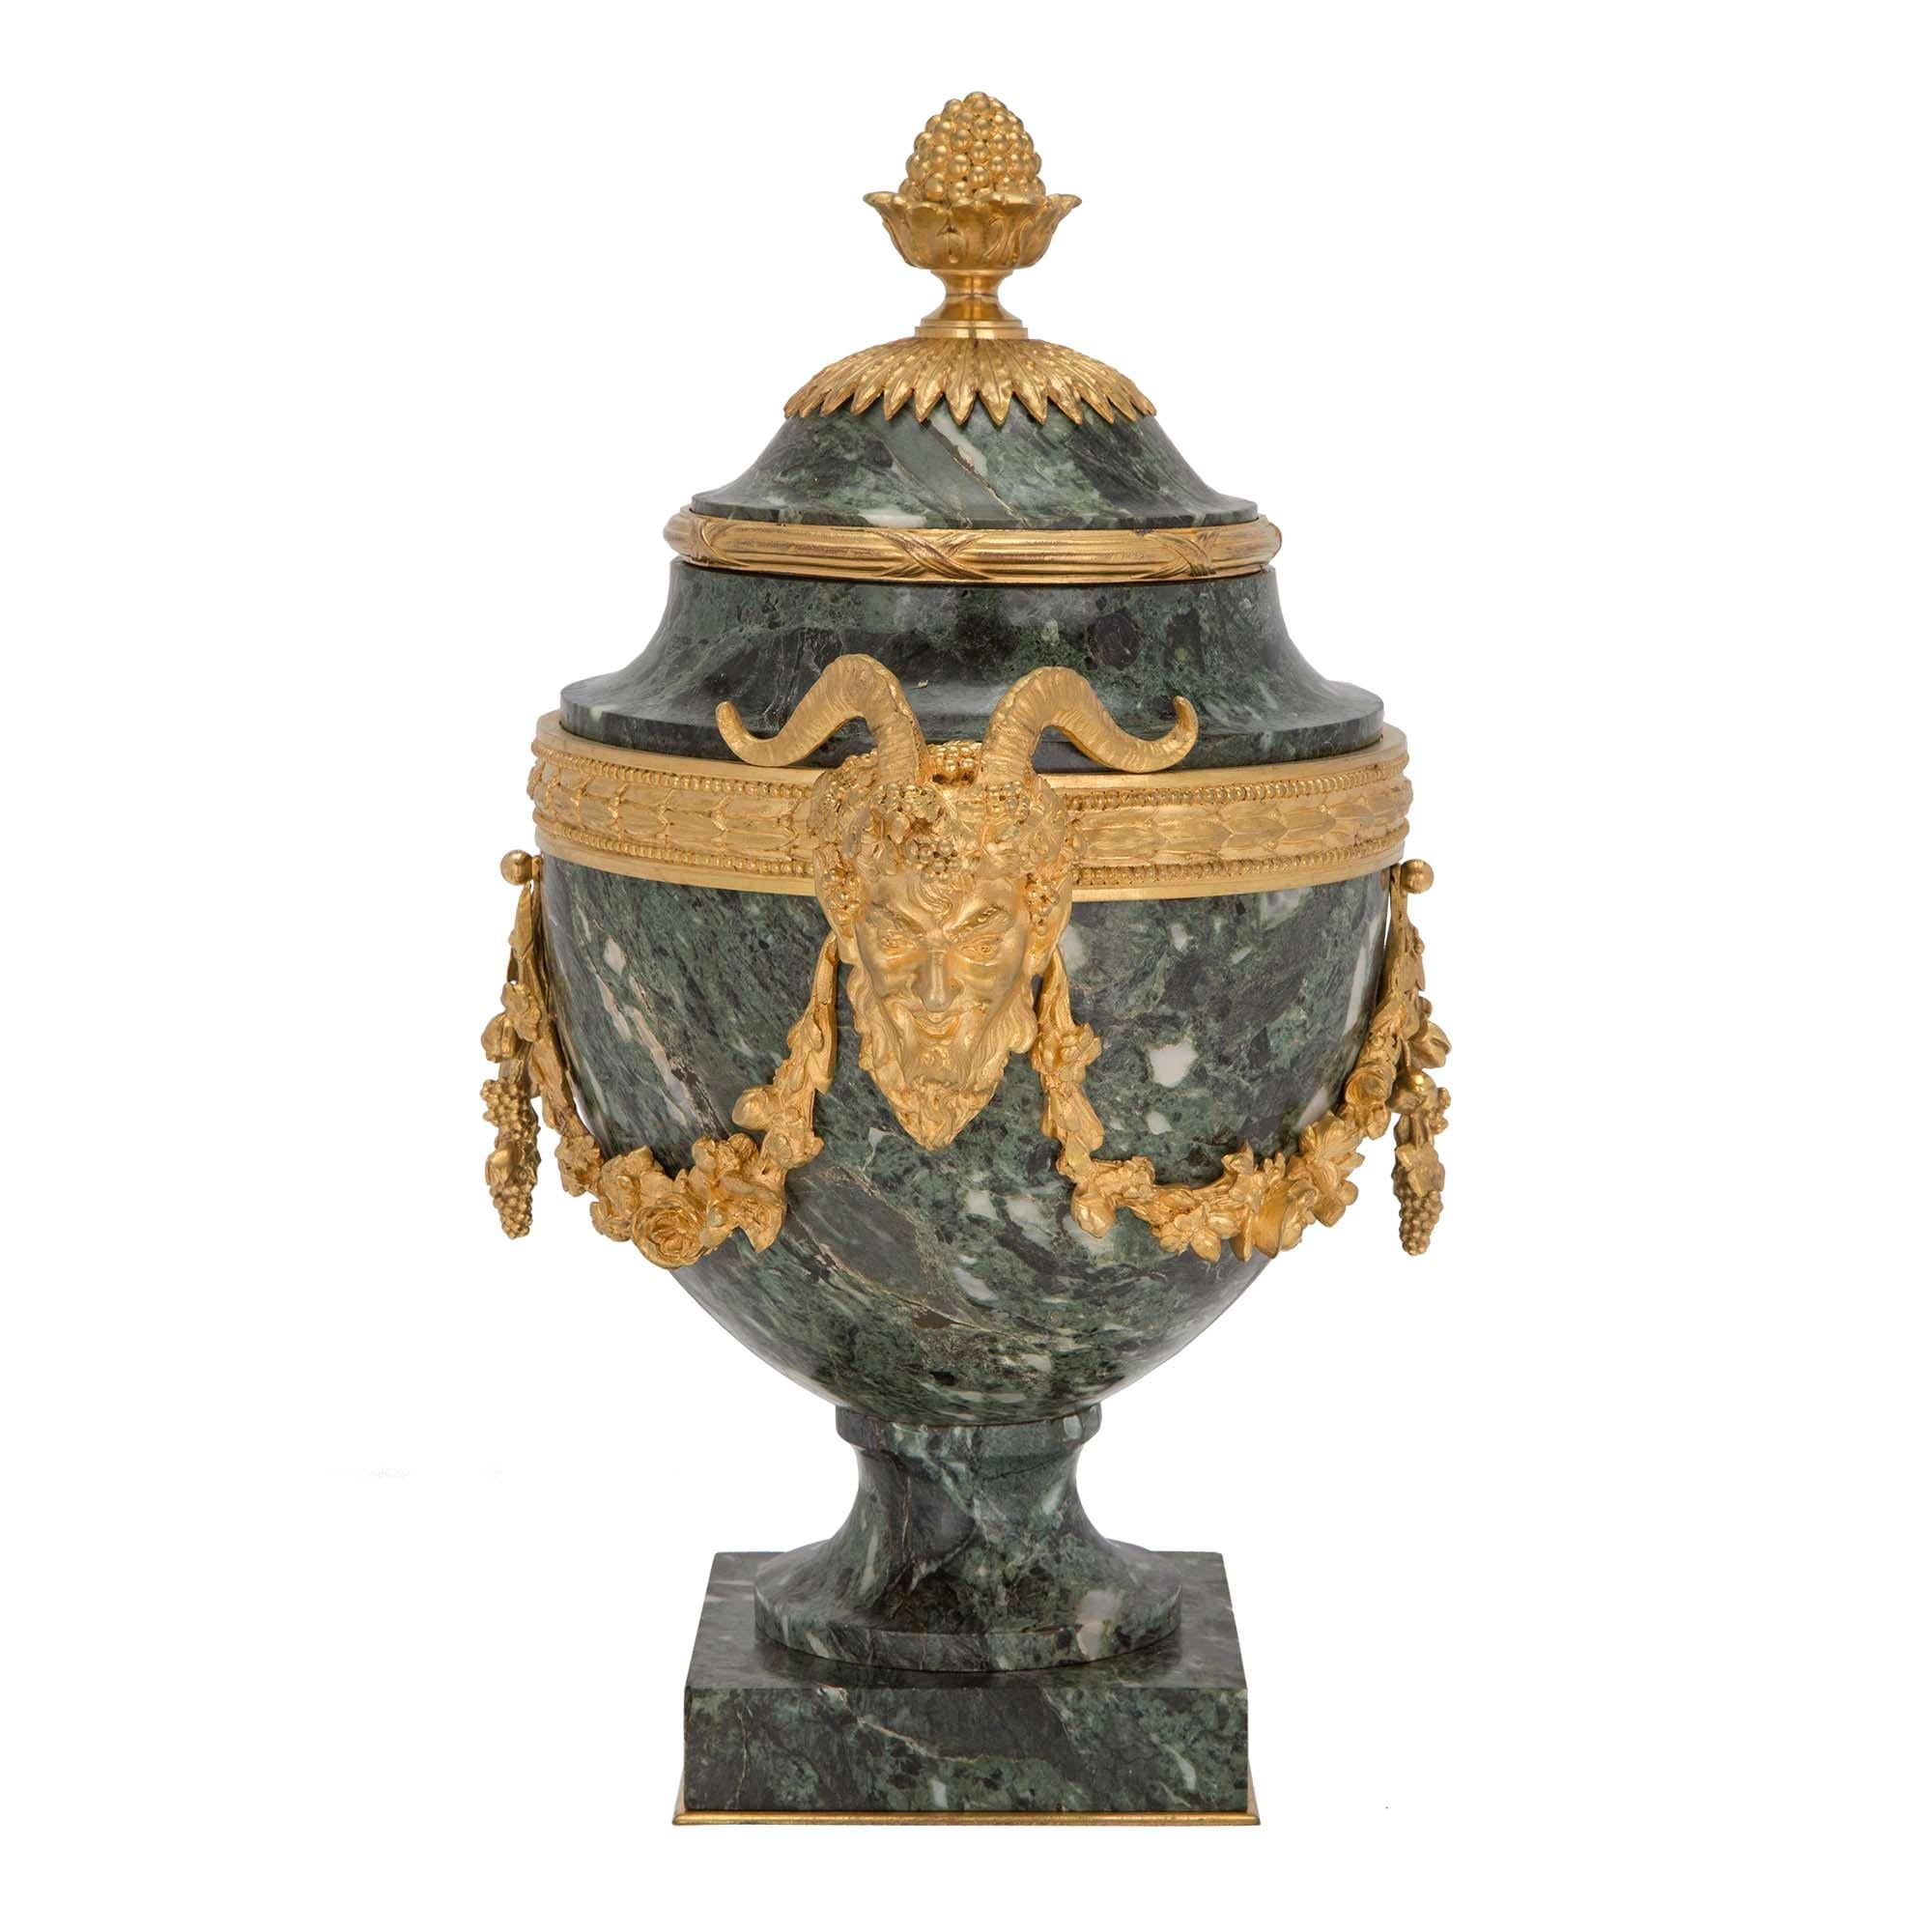 A very elegant pair of French 19th century Louis XVI st. Belle Époque period Vert Antique marble and ormolu urns. Each urn is raised by a square marble base with ormolu trim, and marble socle. The marble body displays a striking richly chased satyr